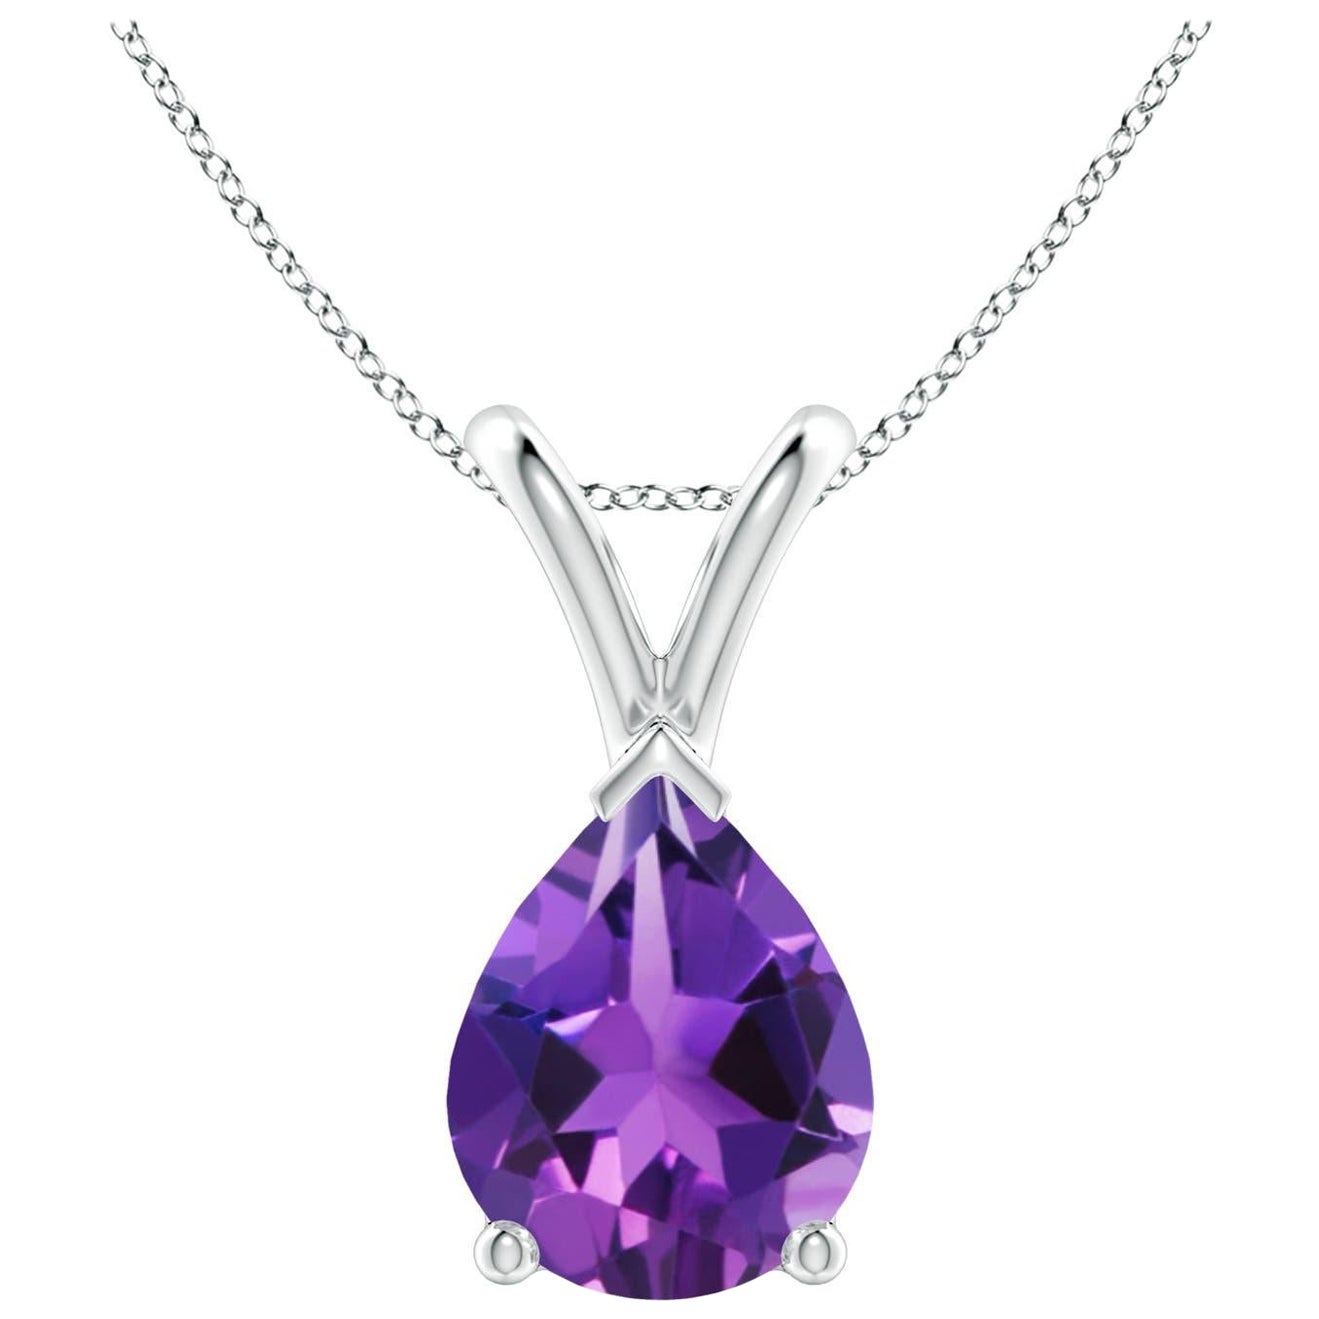 Natural Pear-Shaped 1.5ct Amethyst Solitaire Pendant in 14K White Gold